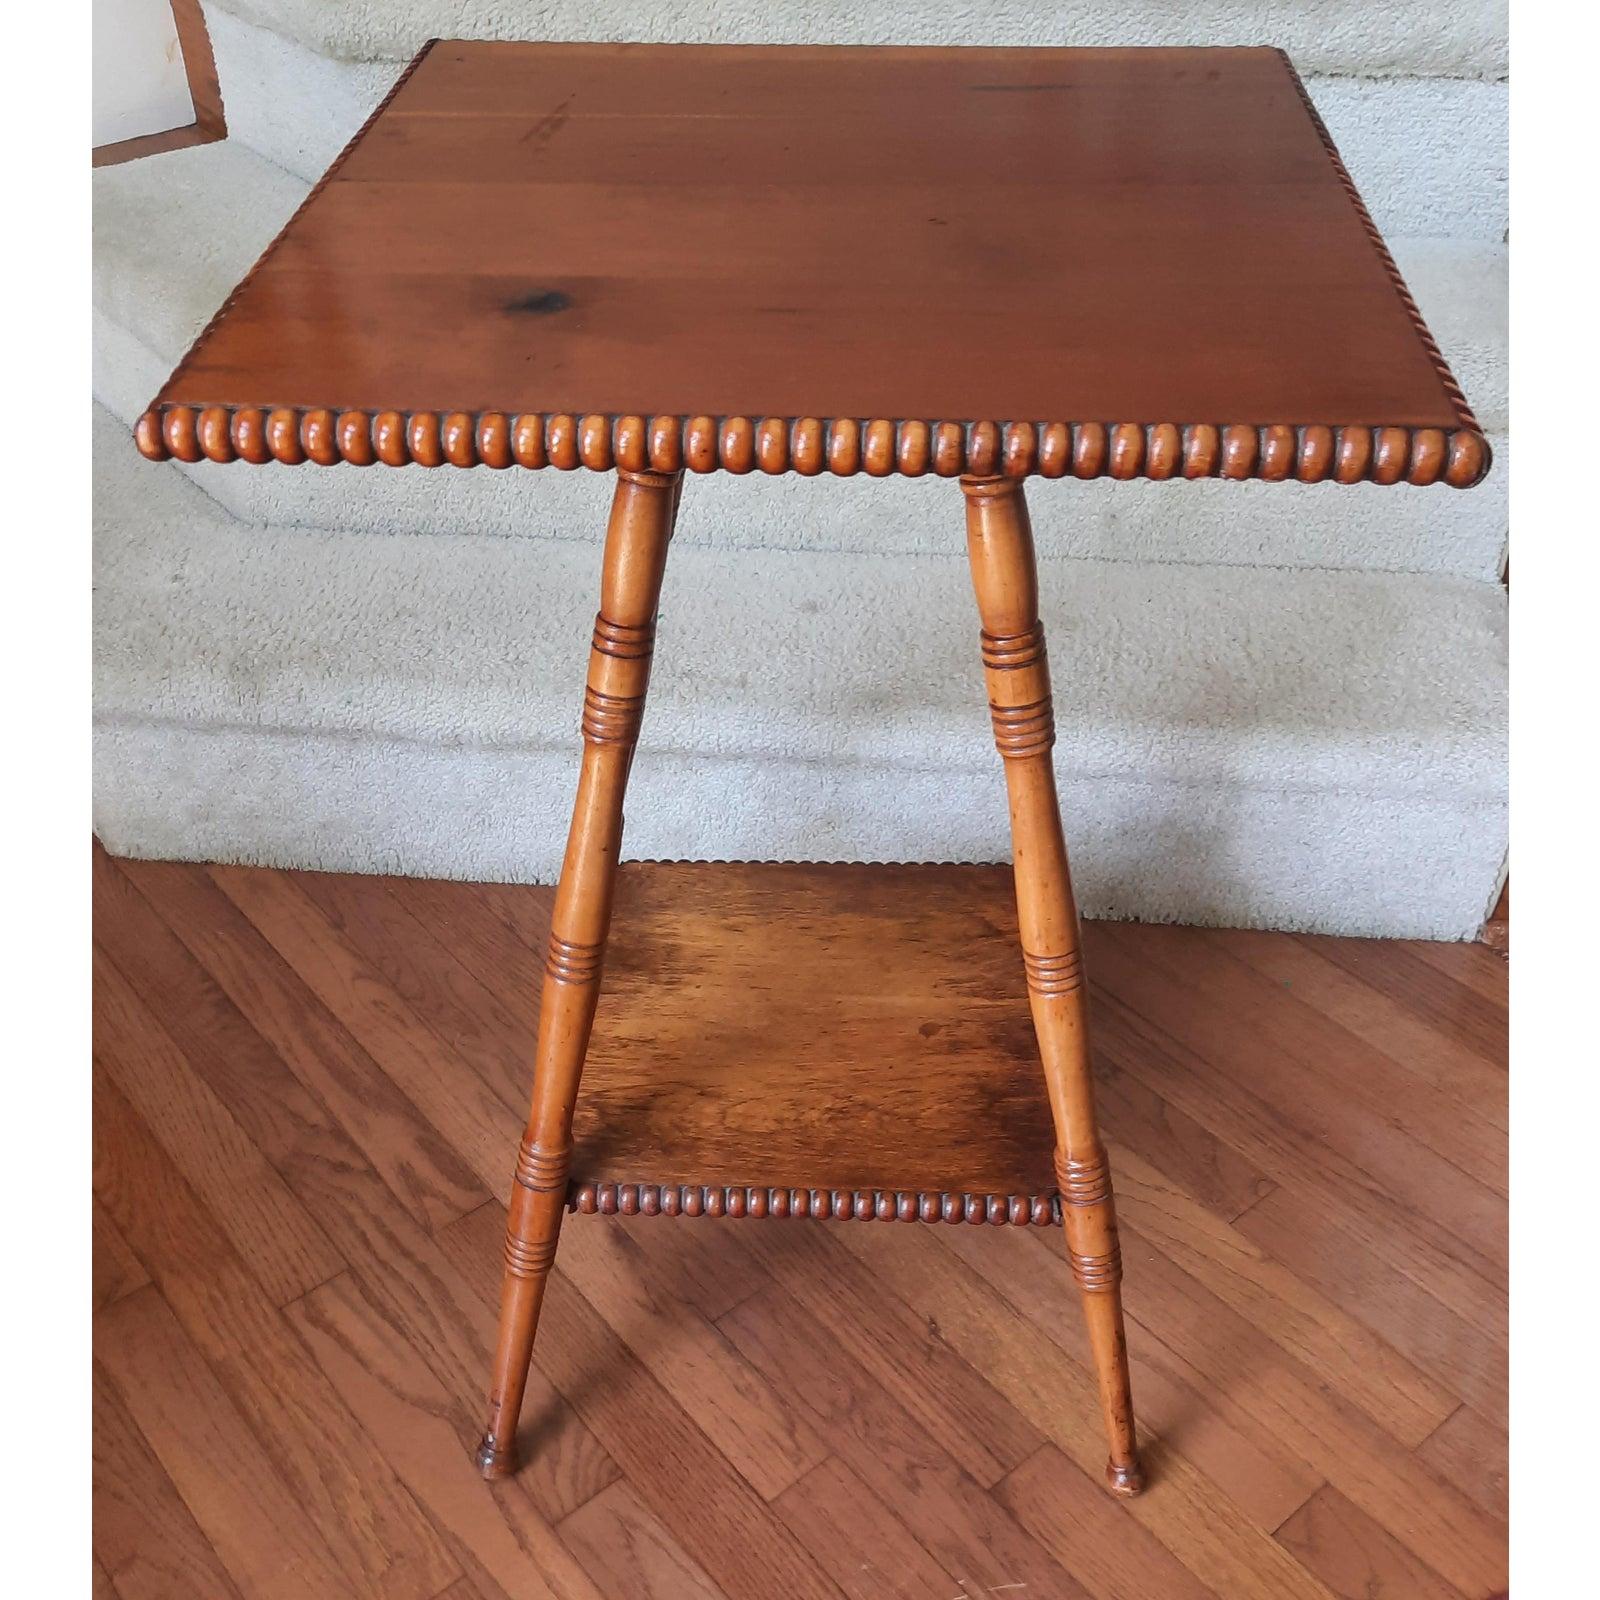 Two tier early American, occasional, parlor accent table. This American Classical style barley twist wooden side or occasional table features two-tiers including a large tabletop with smooth twisted edges. As well as a second smaller bottom tier